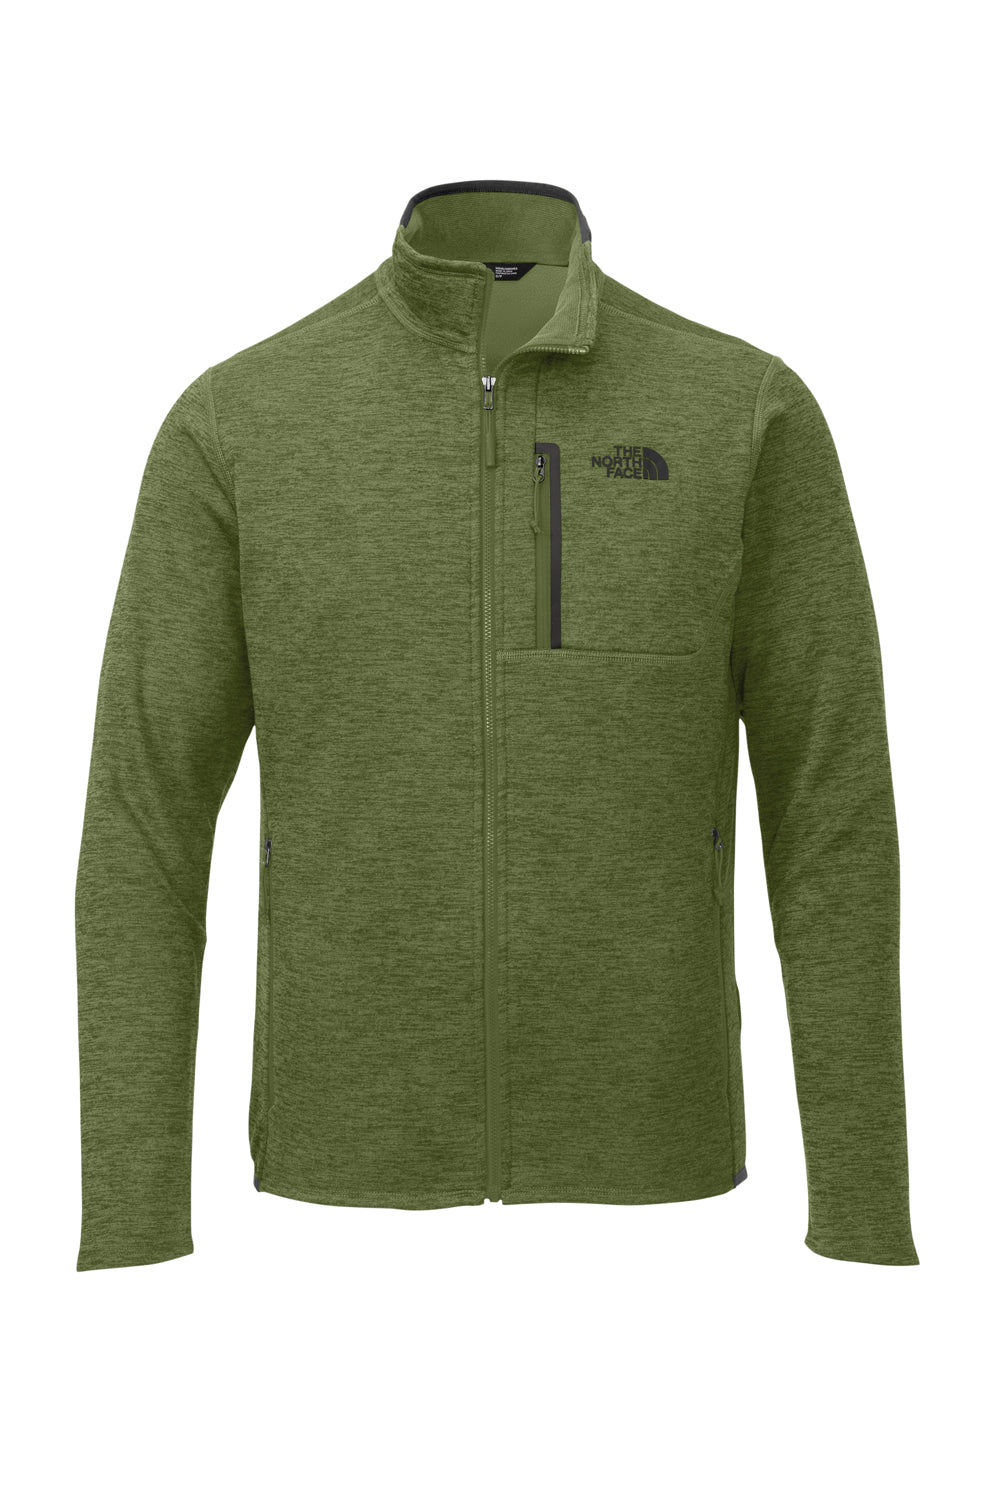 The North Face NF0A7V64 Mens Skyline Full Zip Fleece Jacket Heather Clover Green Flat Front